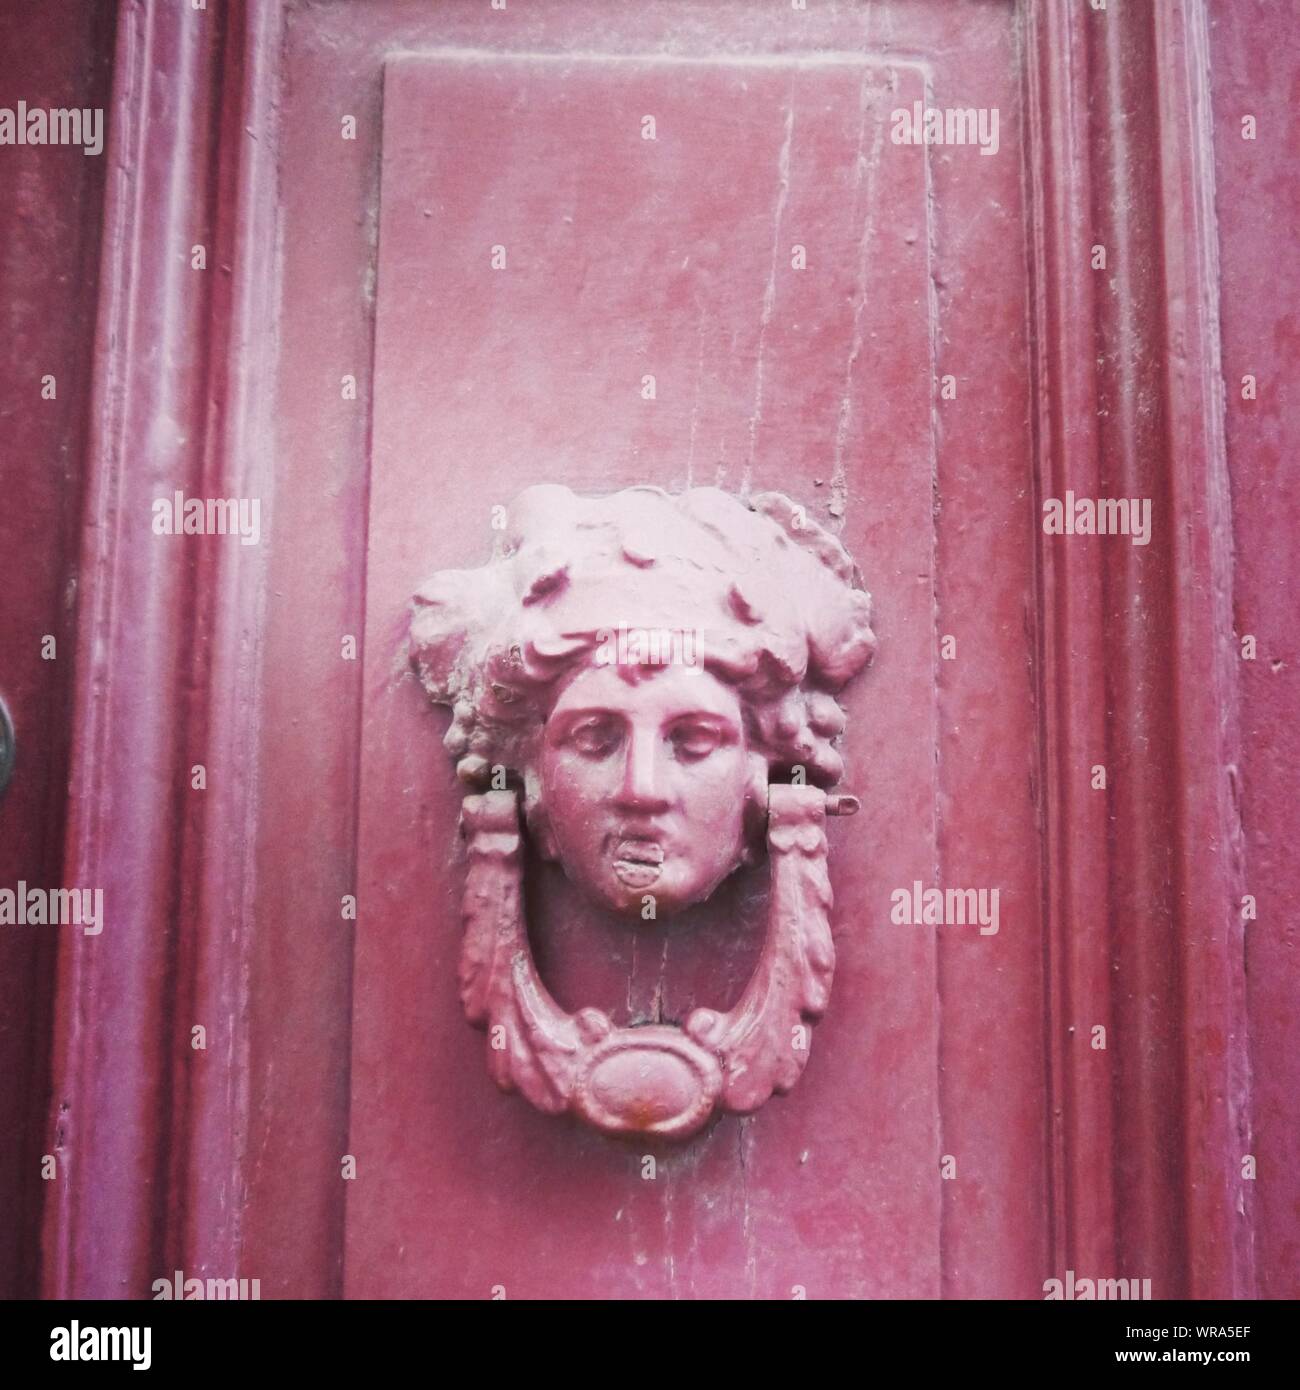 Close-up Of Knocker With Female Carving On Pink Door Stock Photo